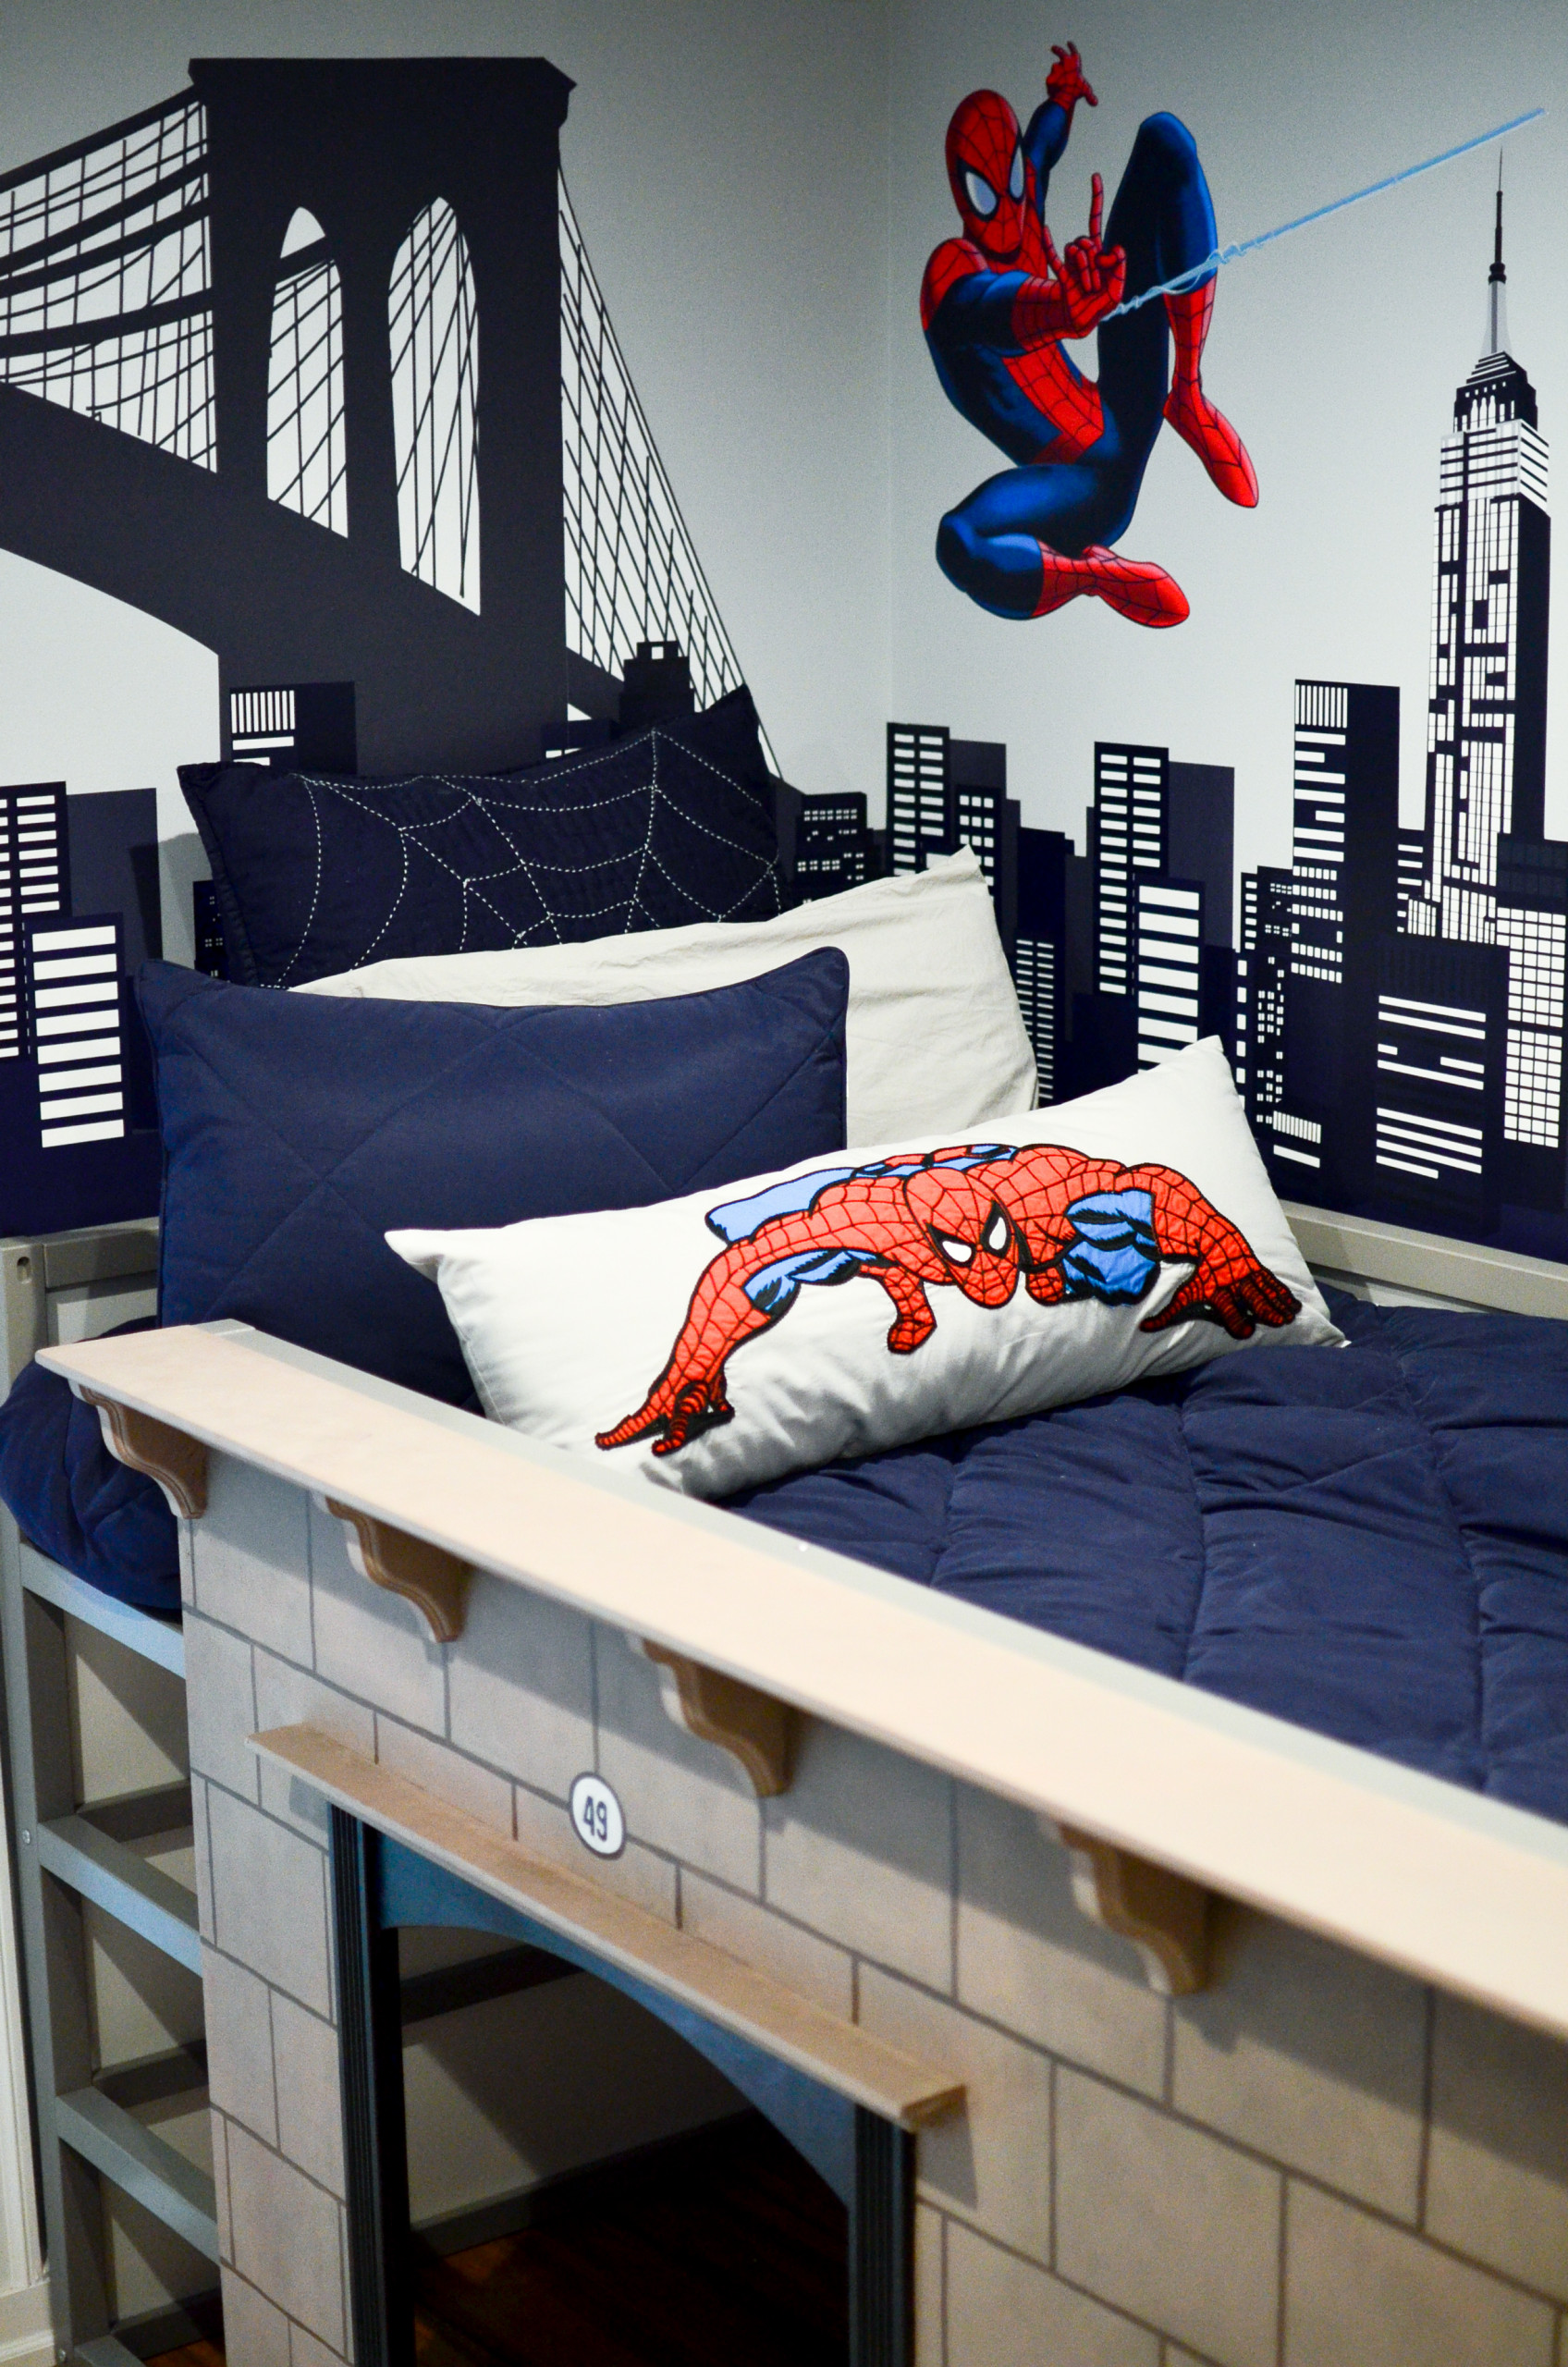 15 Kids Bedroom Design with Spiderman Themes